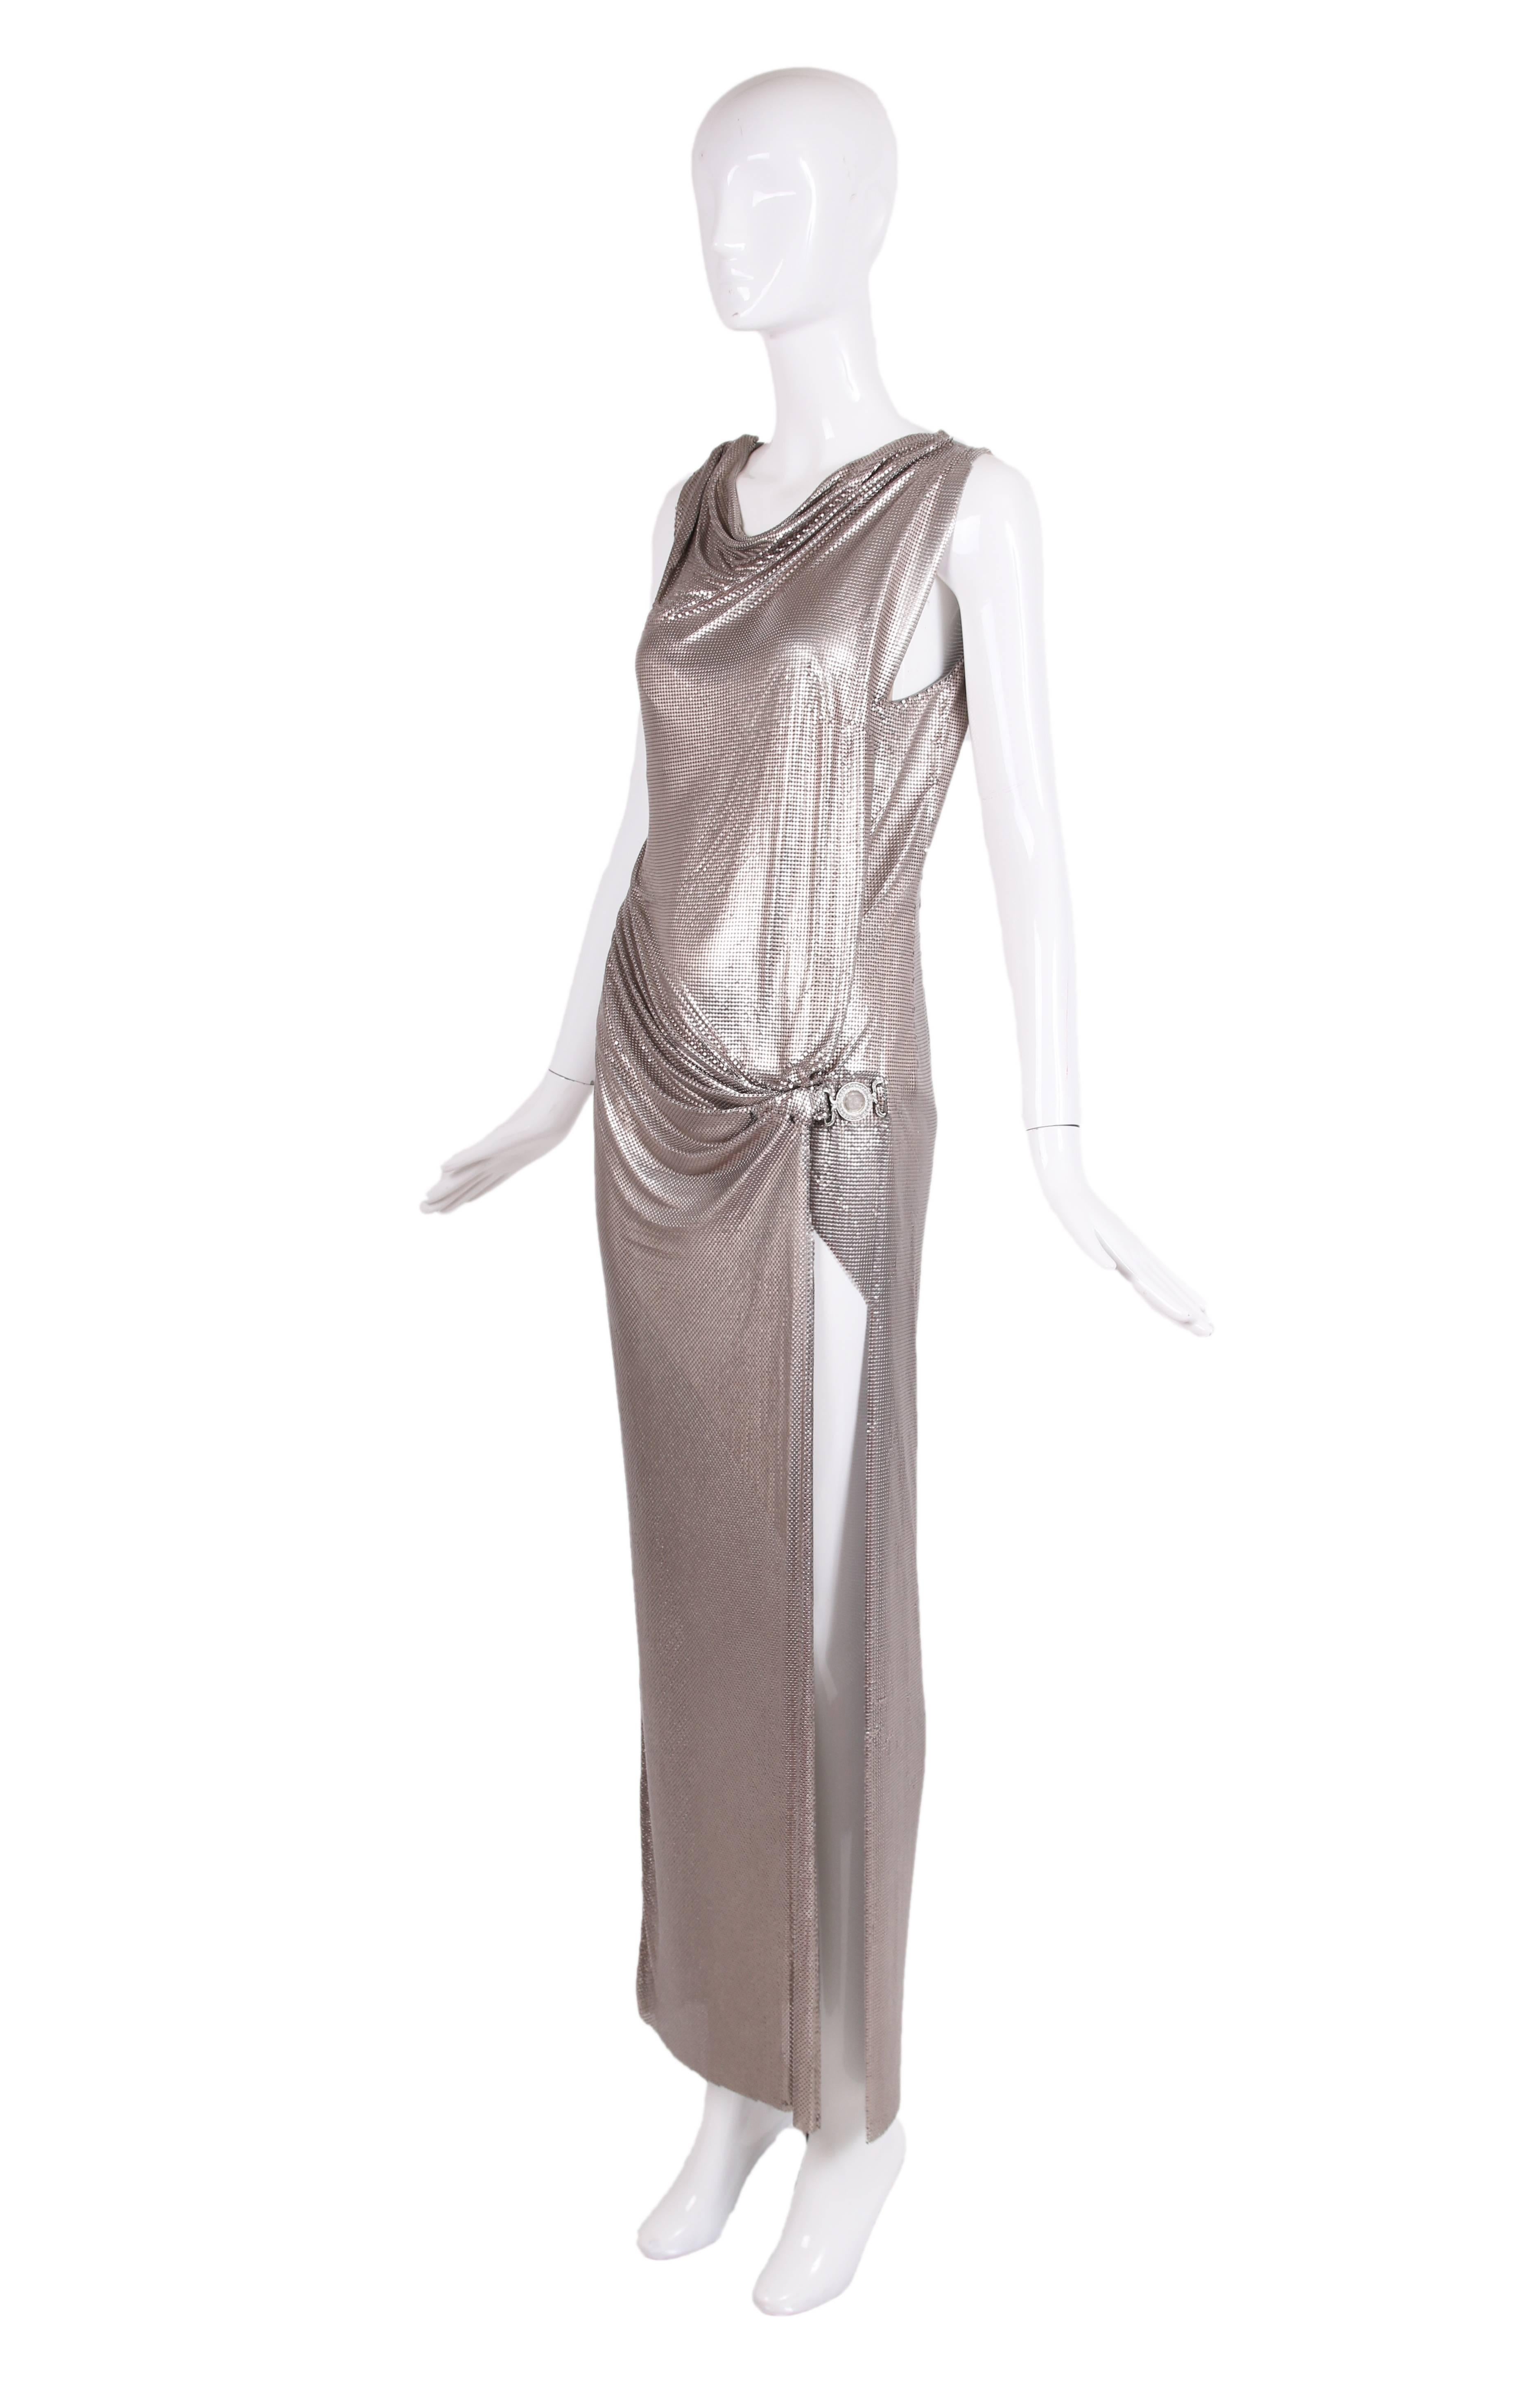 1998 S/S Gianni Versace couture label Oroton silver chainmail sleeveless gown with draping at the front right which culminates in a clear medusa medallion located at left/thigh-high slit. In excellent condition. Labeled at bodysuit located at